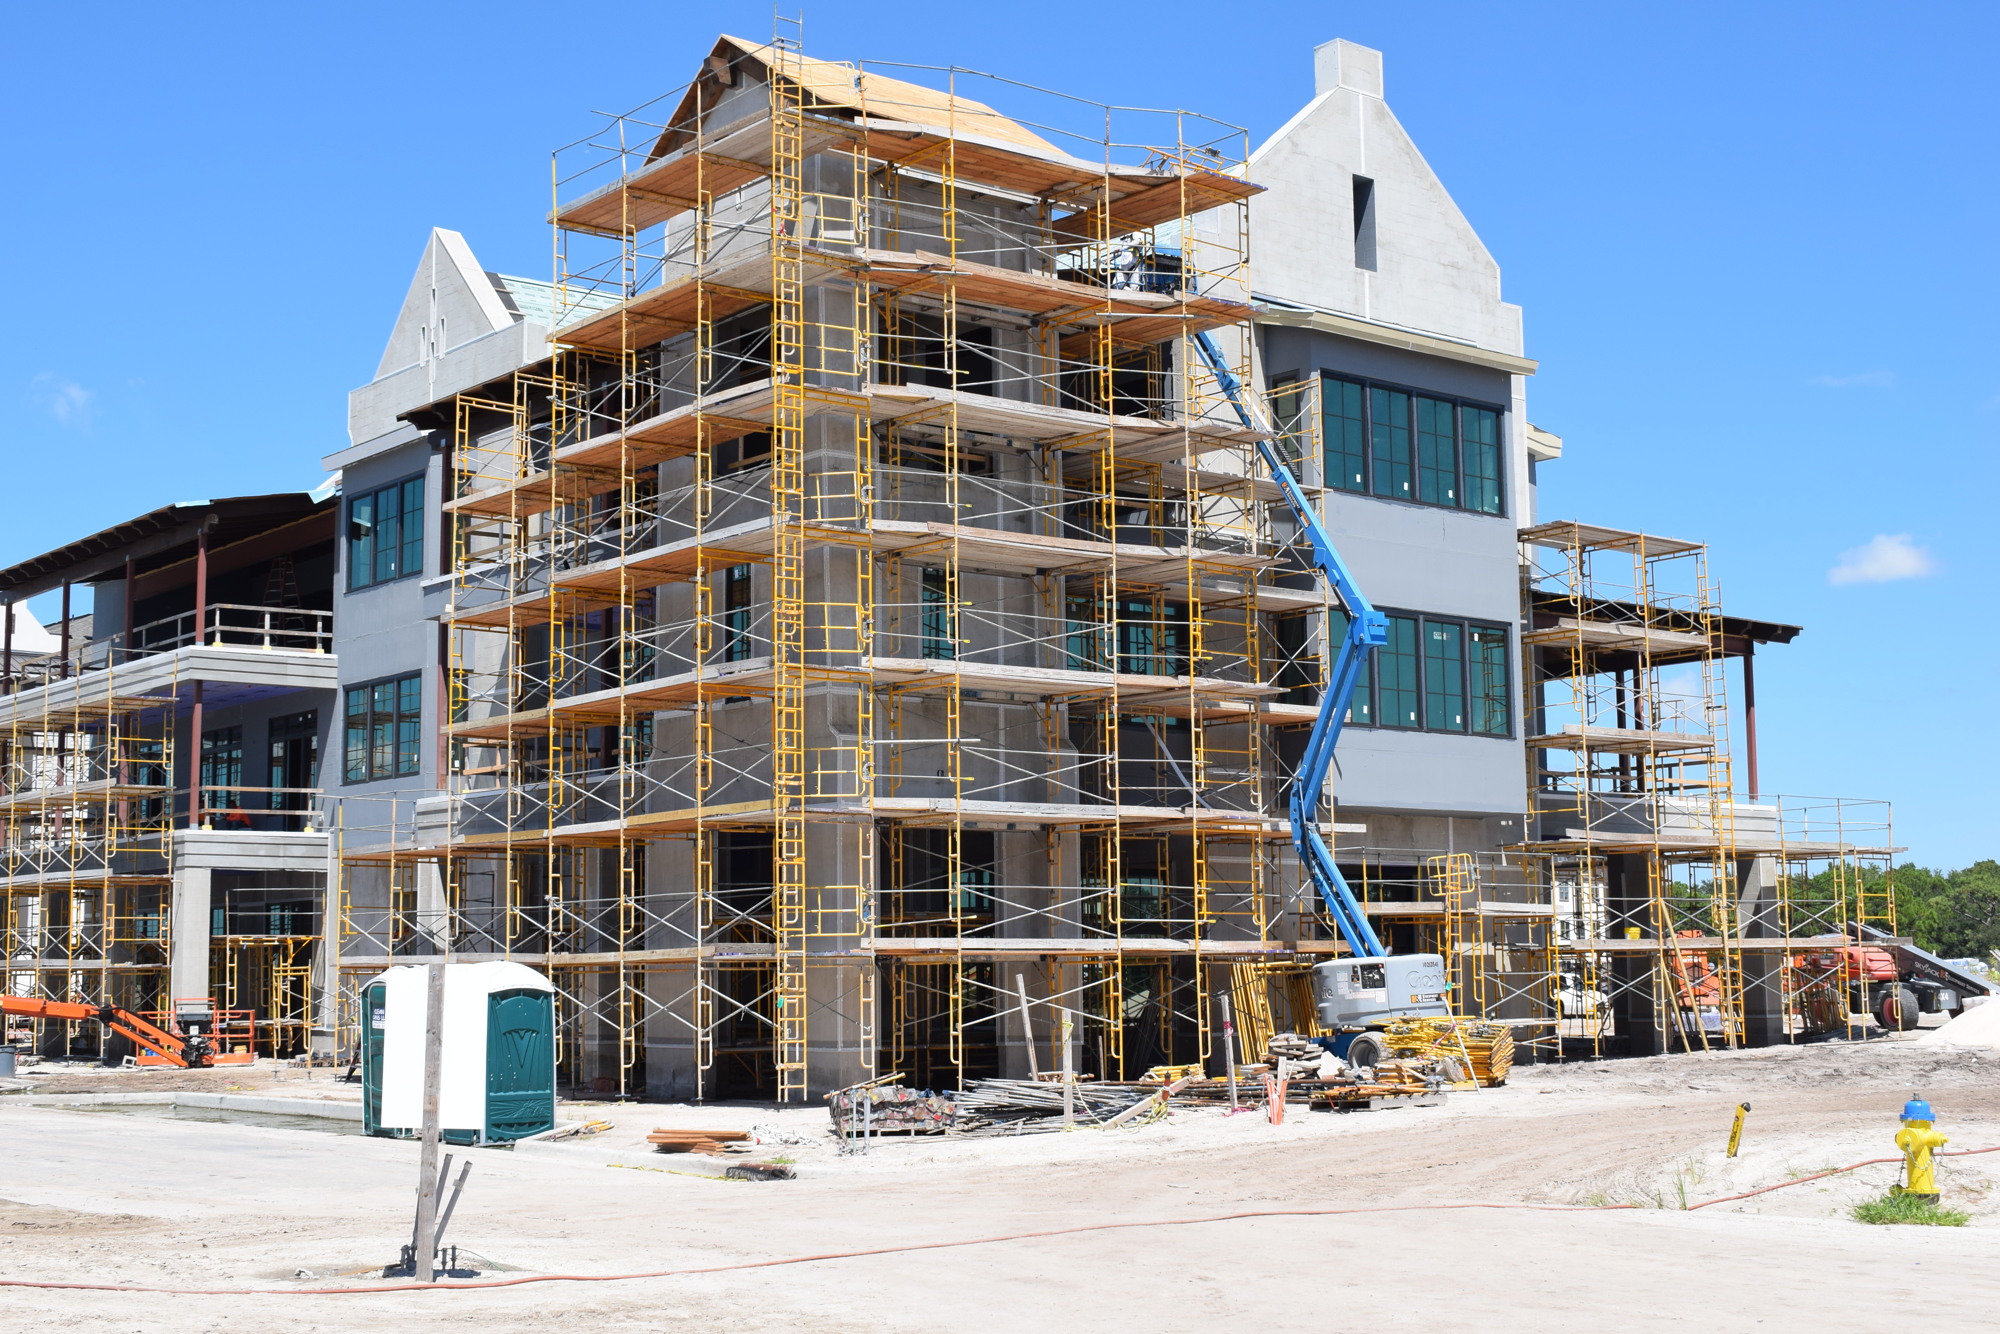 Waterside Place is taking shape as it advances to its opening in the spring.